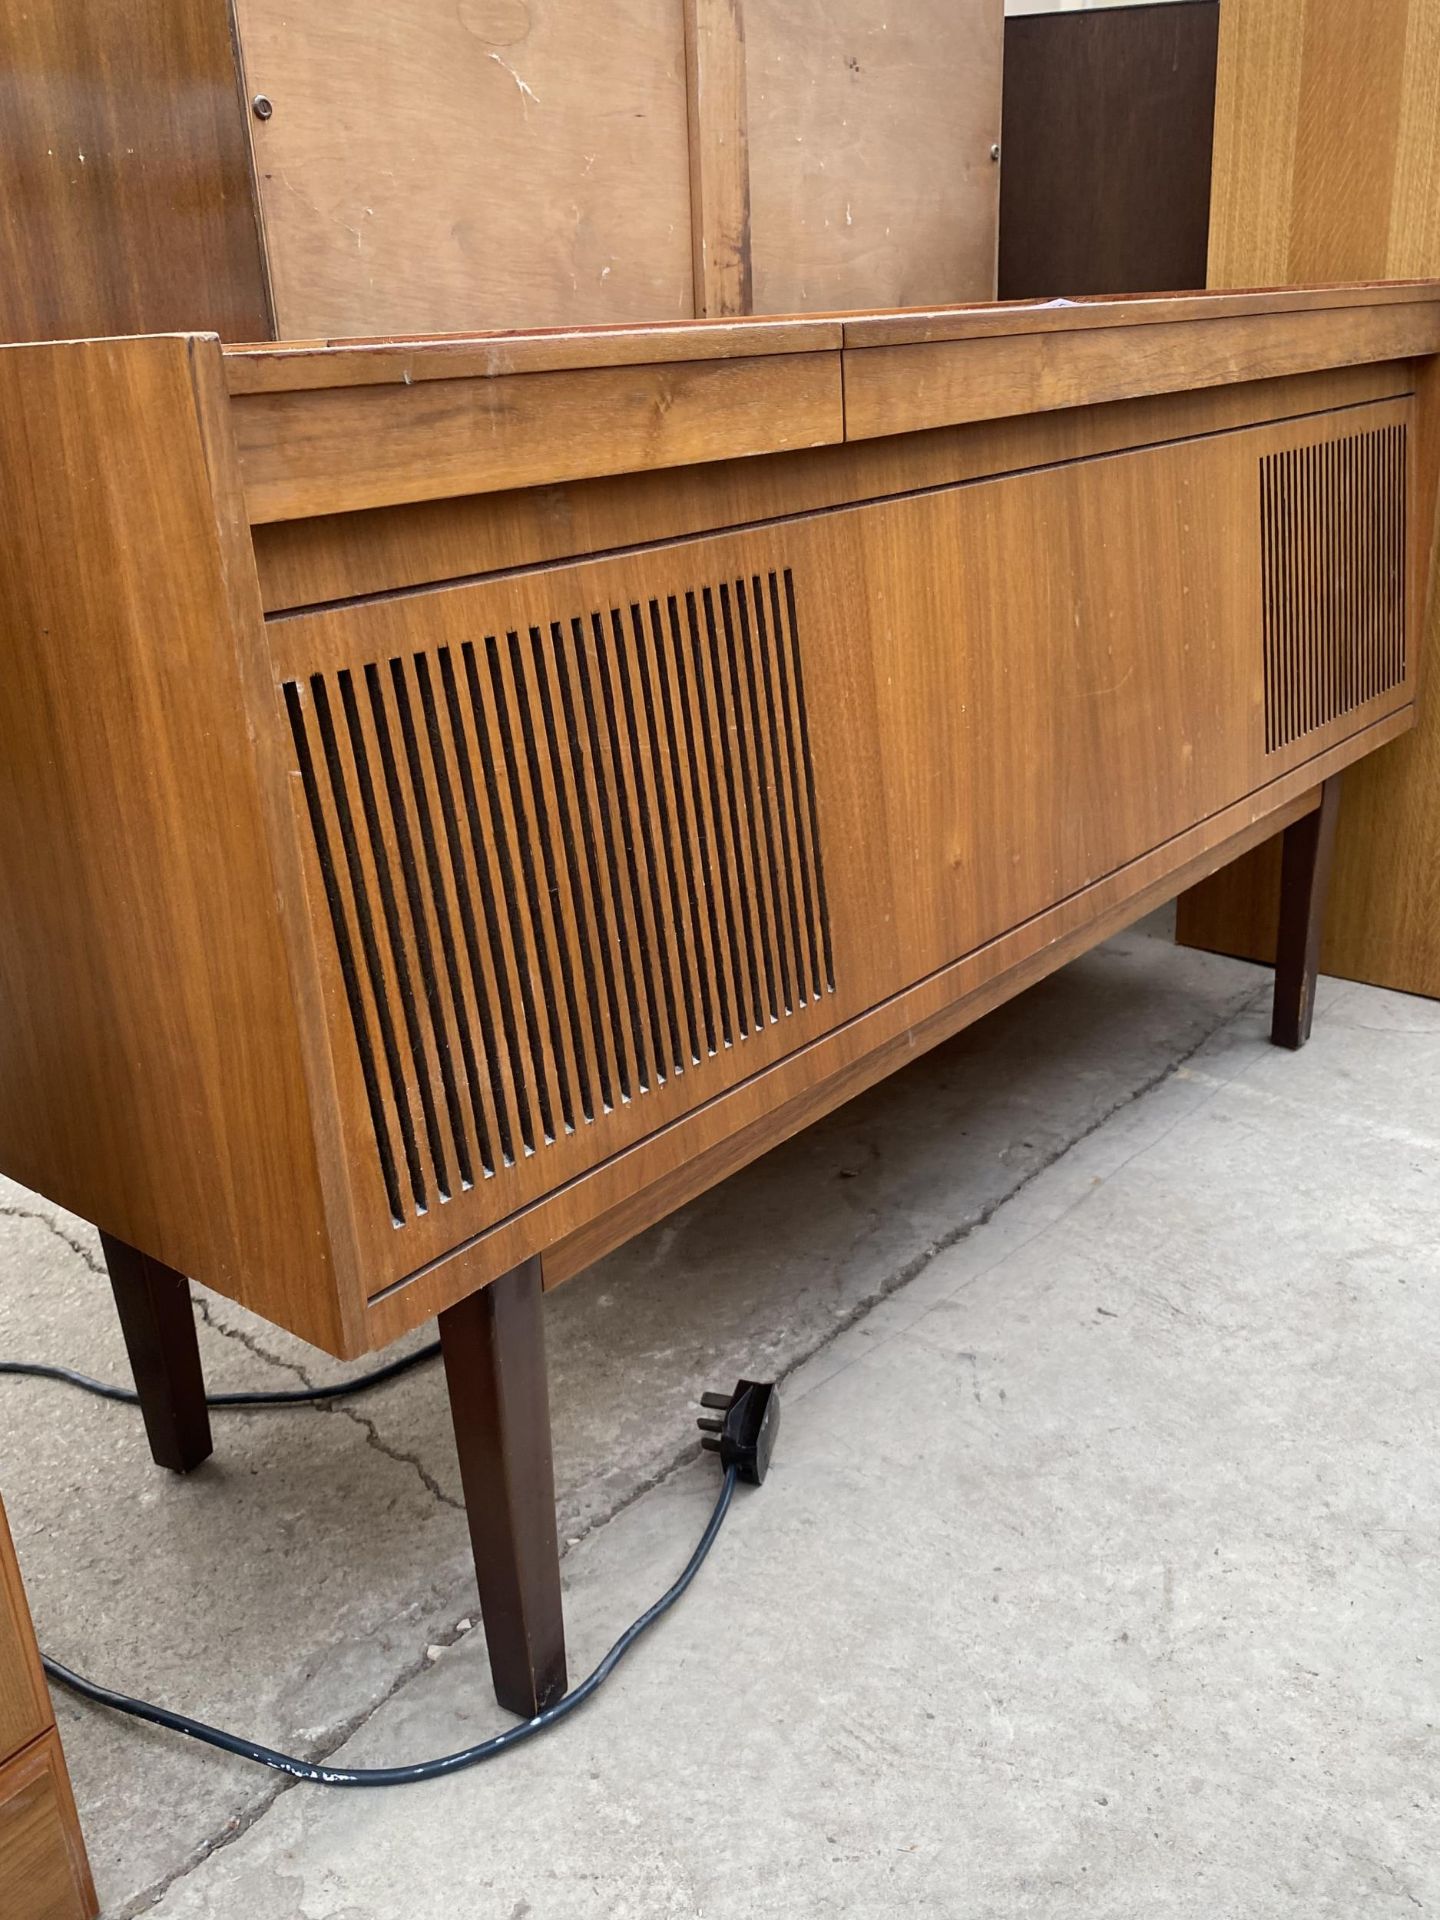 AN ULTRA RADIOGRAM IN A RETRO TEAK CABINET - Image 2 of 4